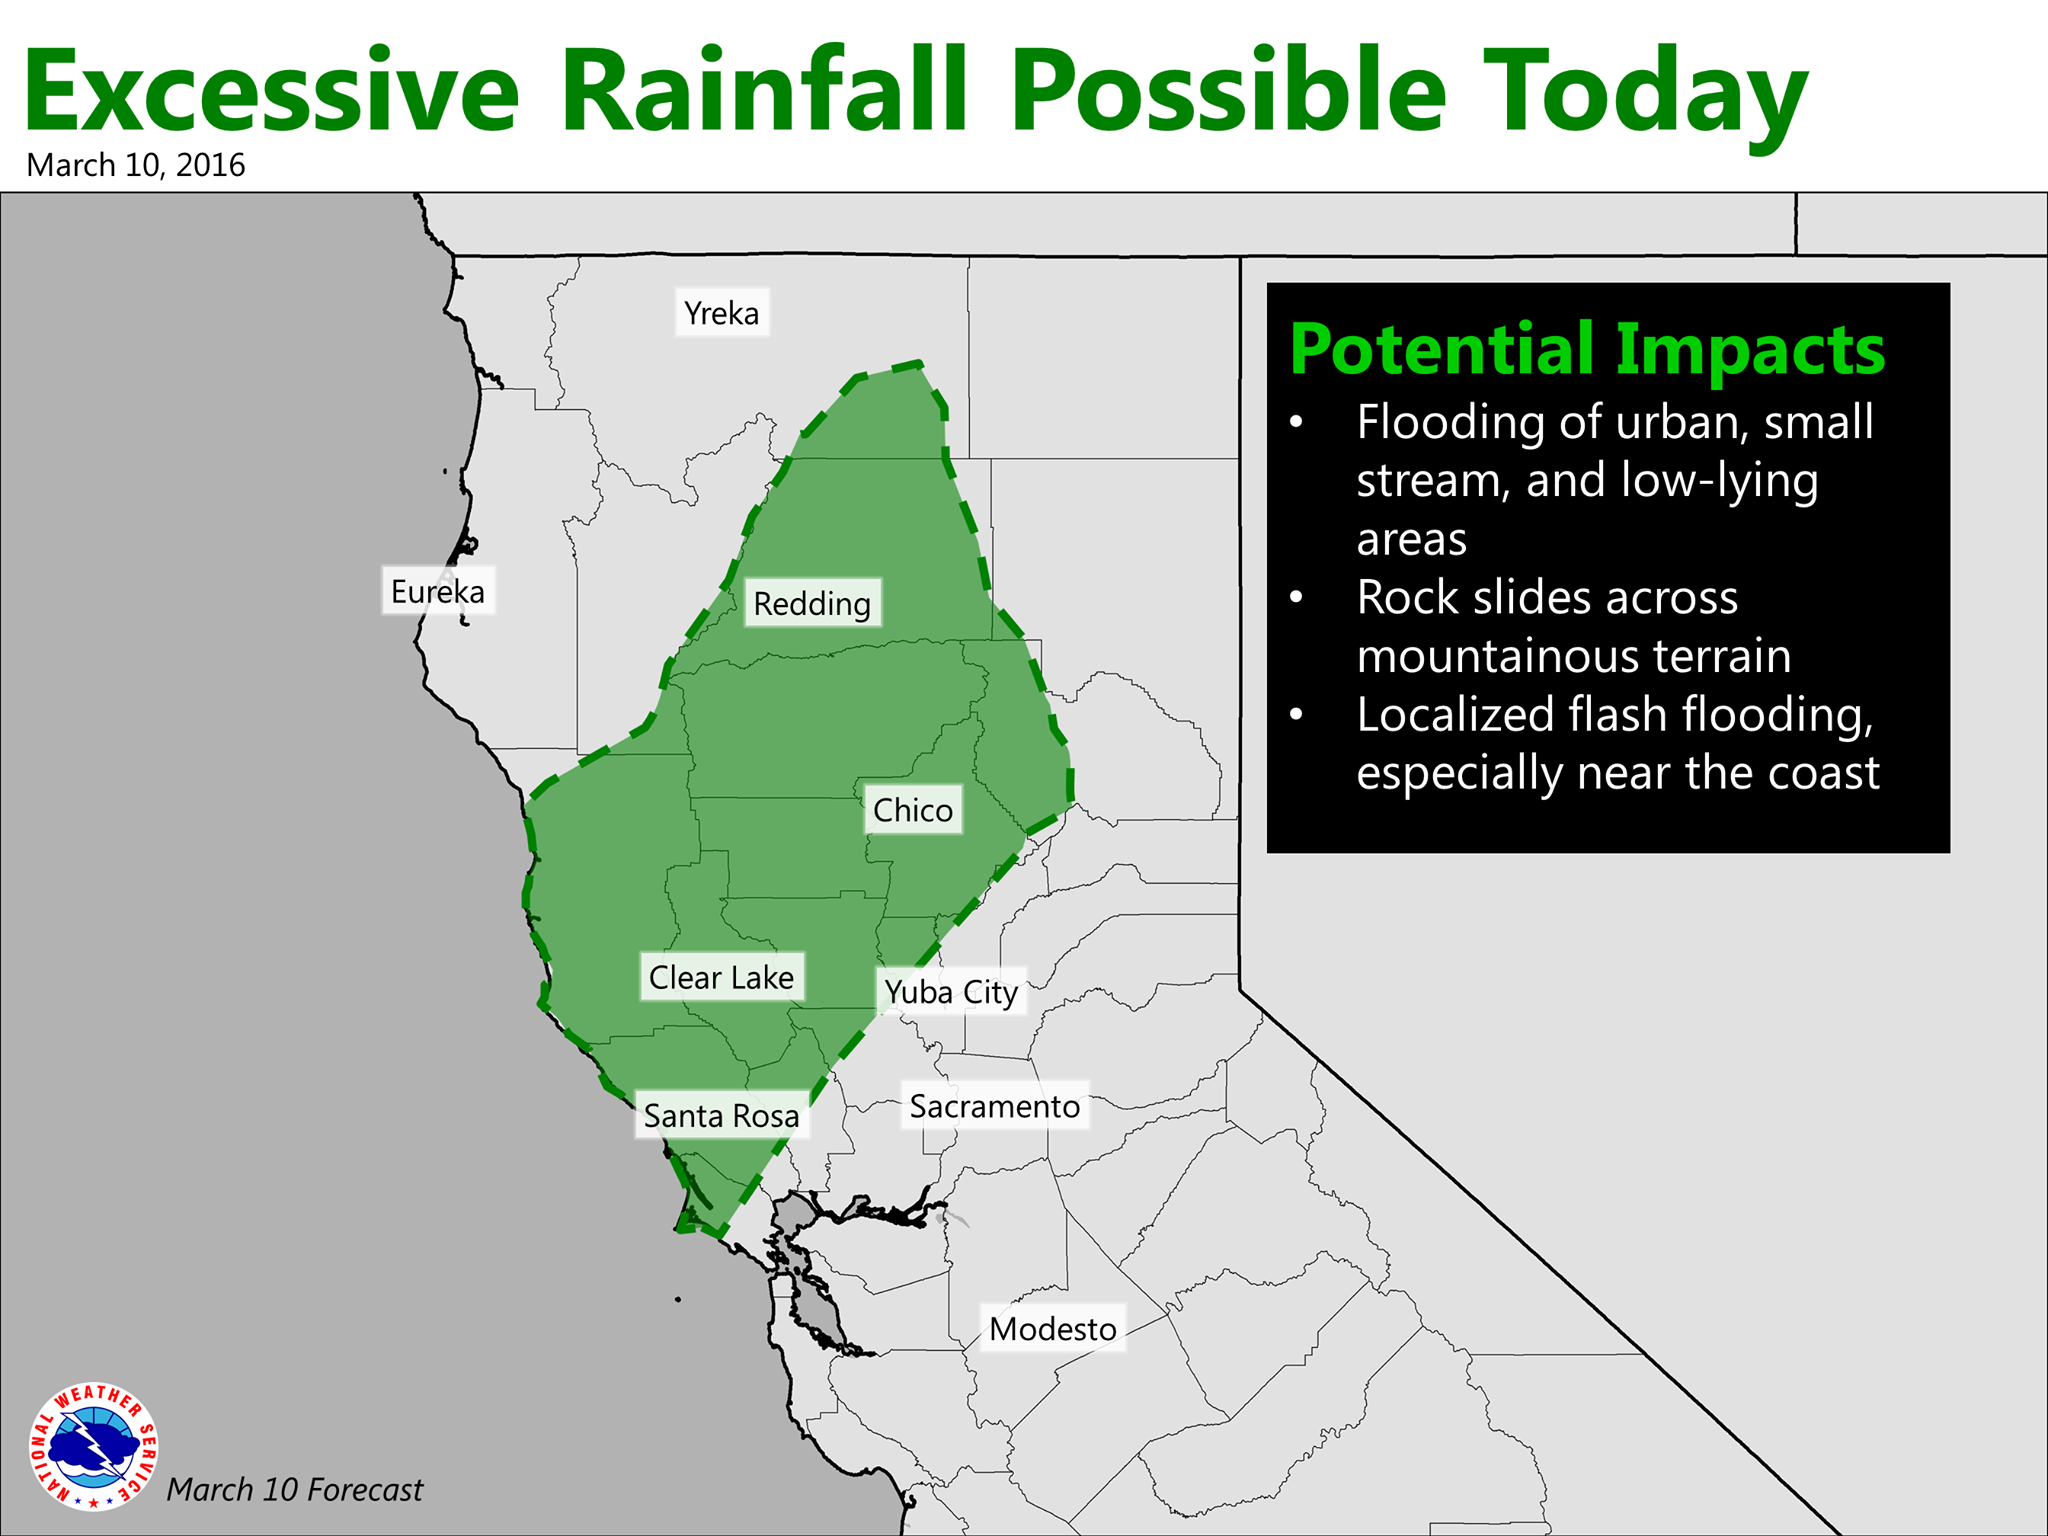 "A warm and wet weather system is moving through Northern California today. This system is expected to stall just north of Interstate 80, and could bring an extended period of heavy precipitation along a narrow corridor. Flooding of urban, small stream, and low-lying areas will be possible, along with rock slides across mountainous terrain." - NOAA Sacramento, CA today